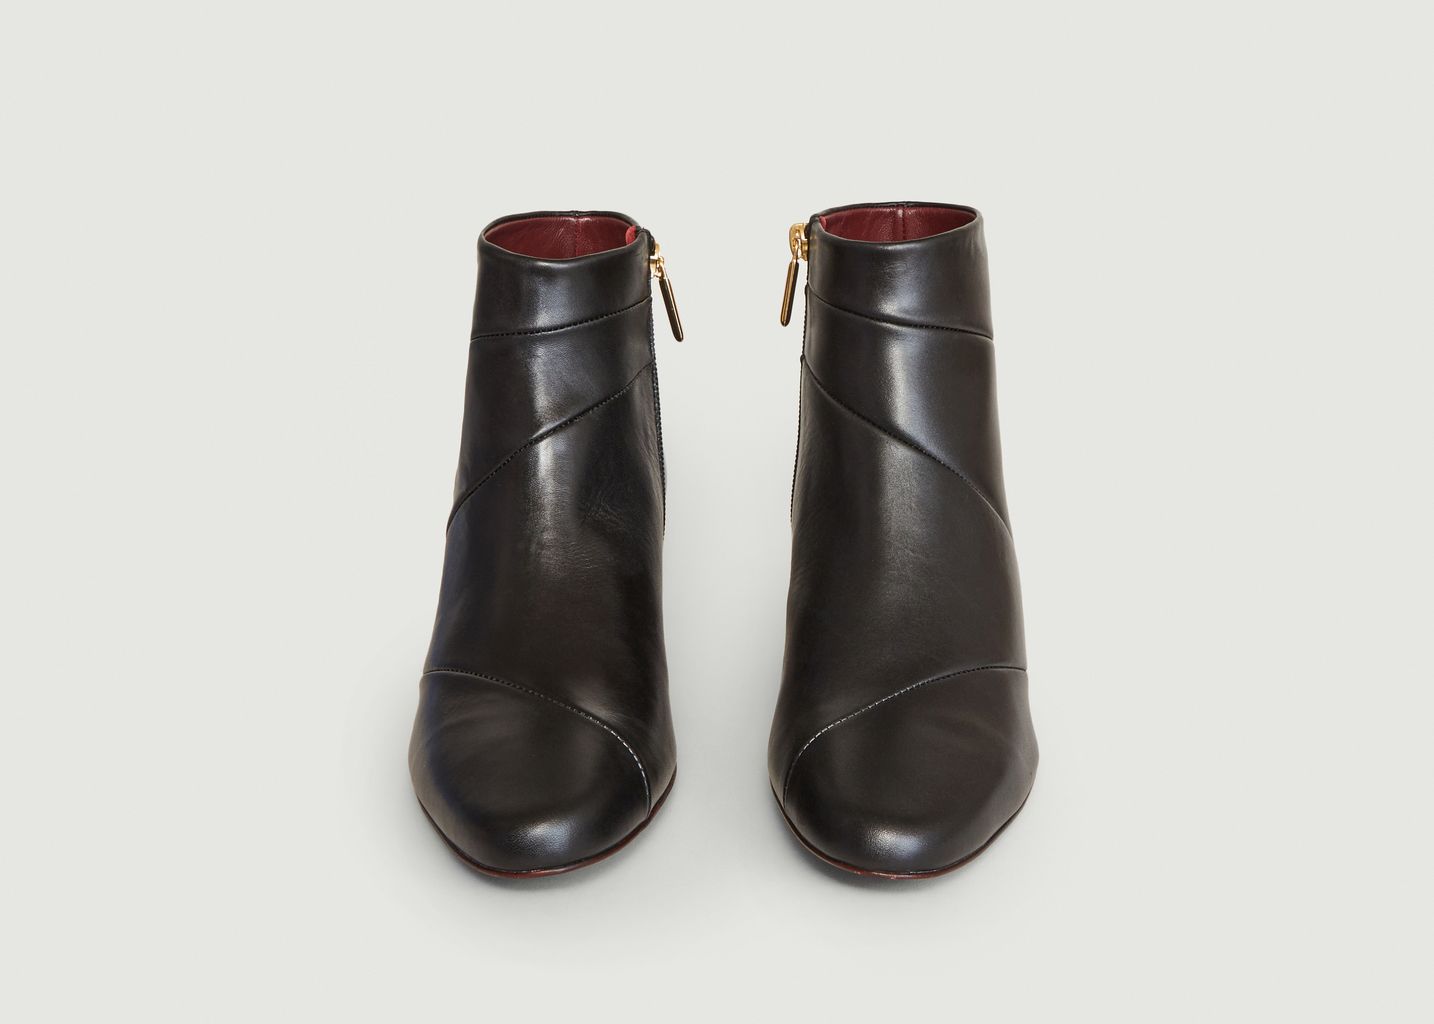 Moune topstitched leather boots - Avril Gau